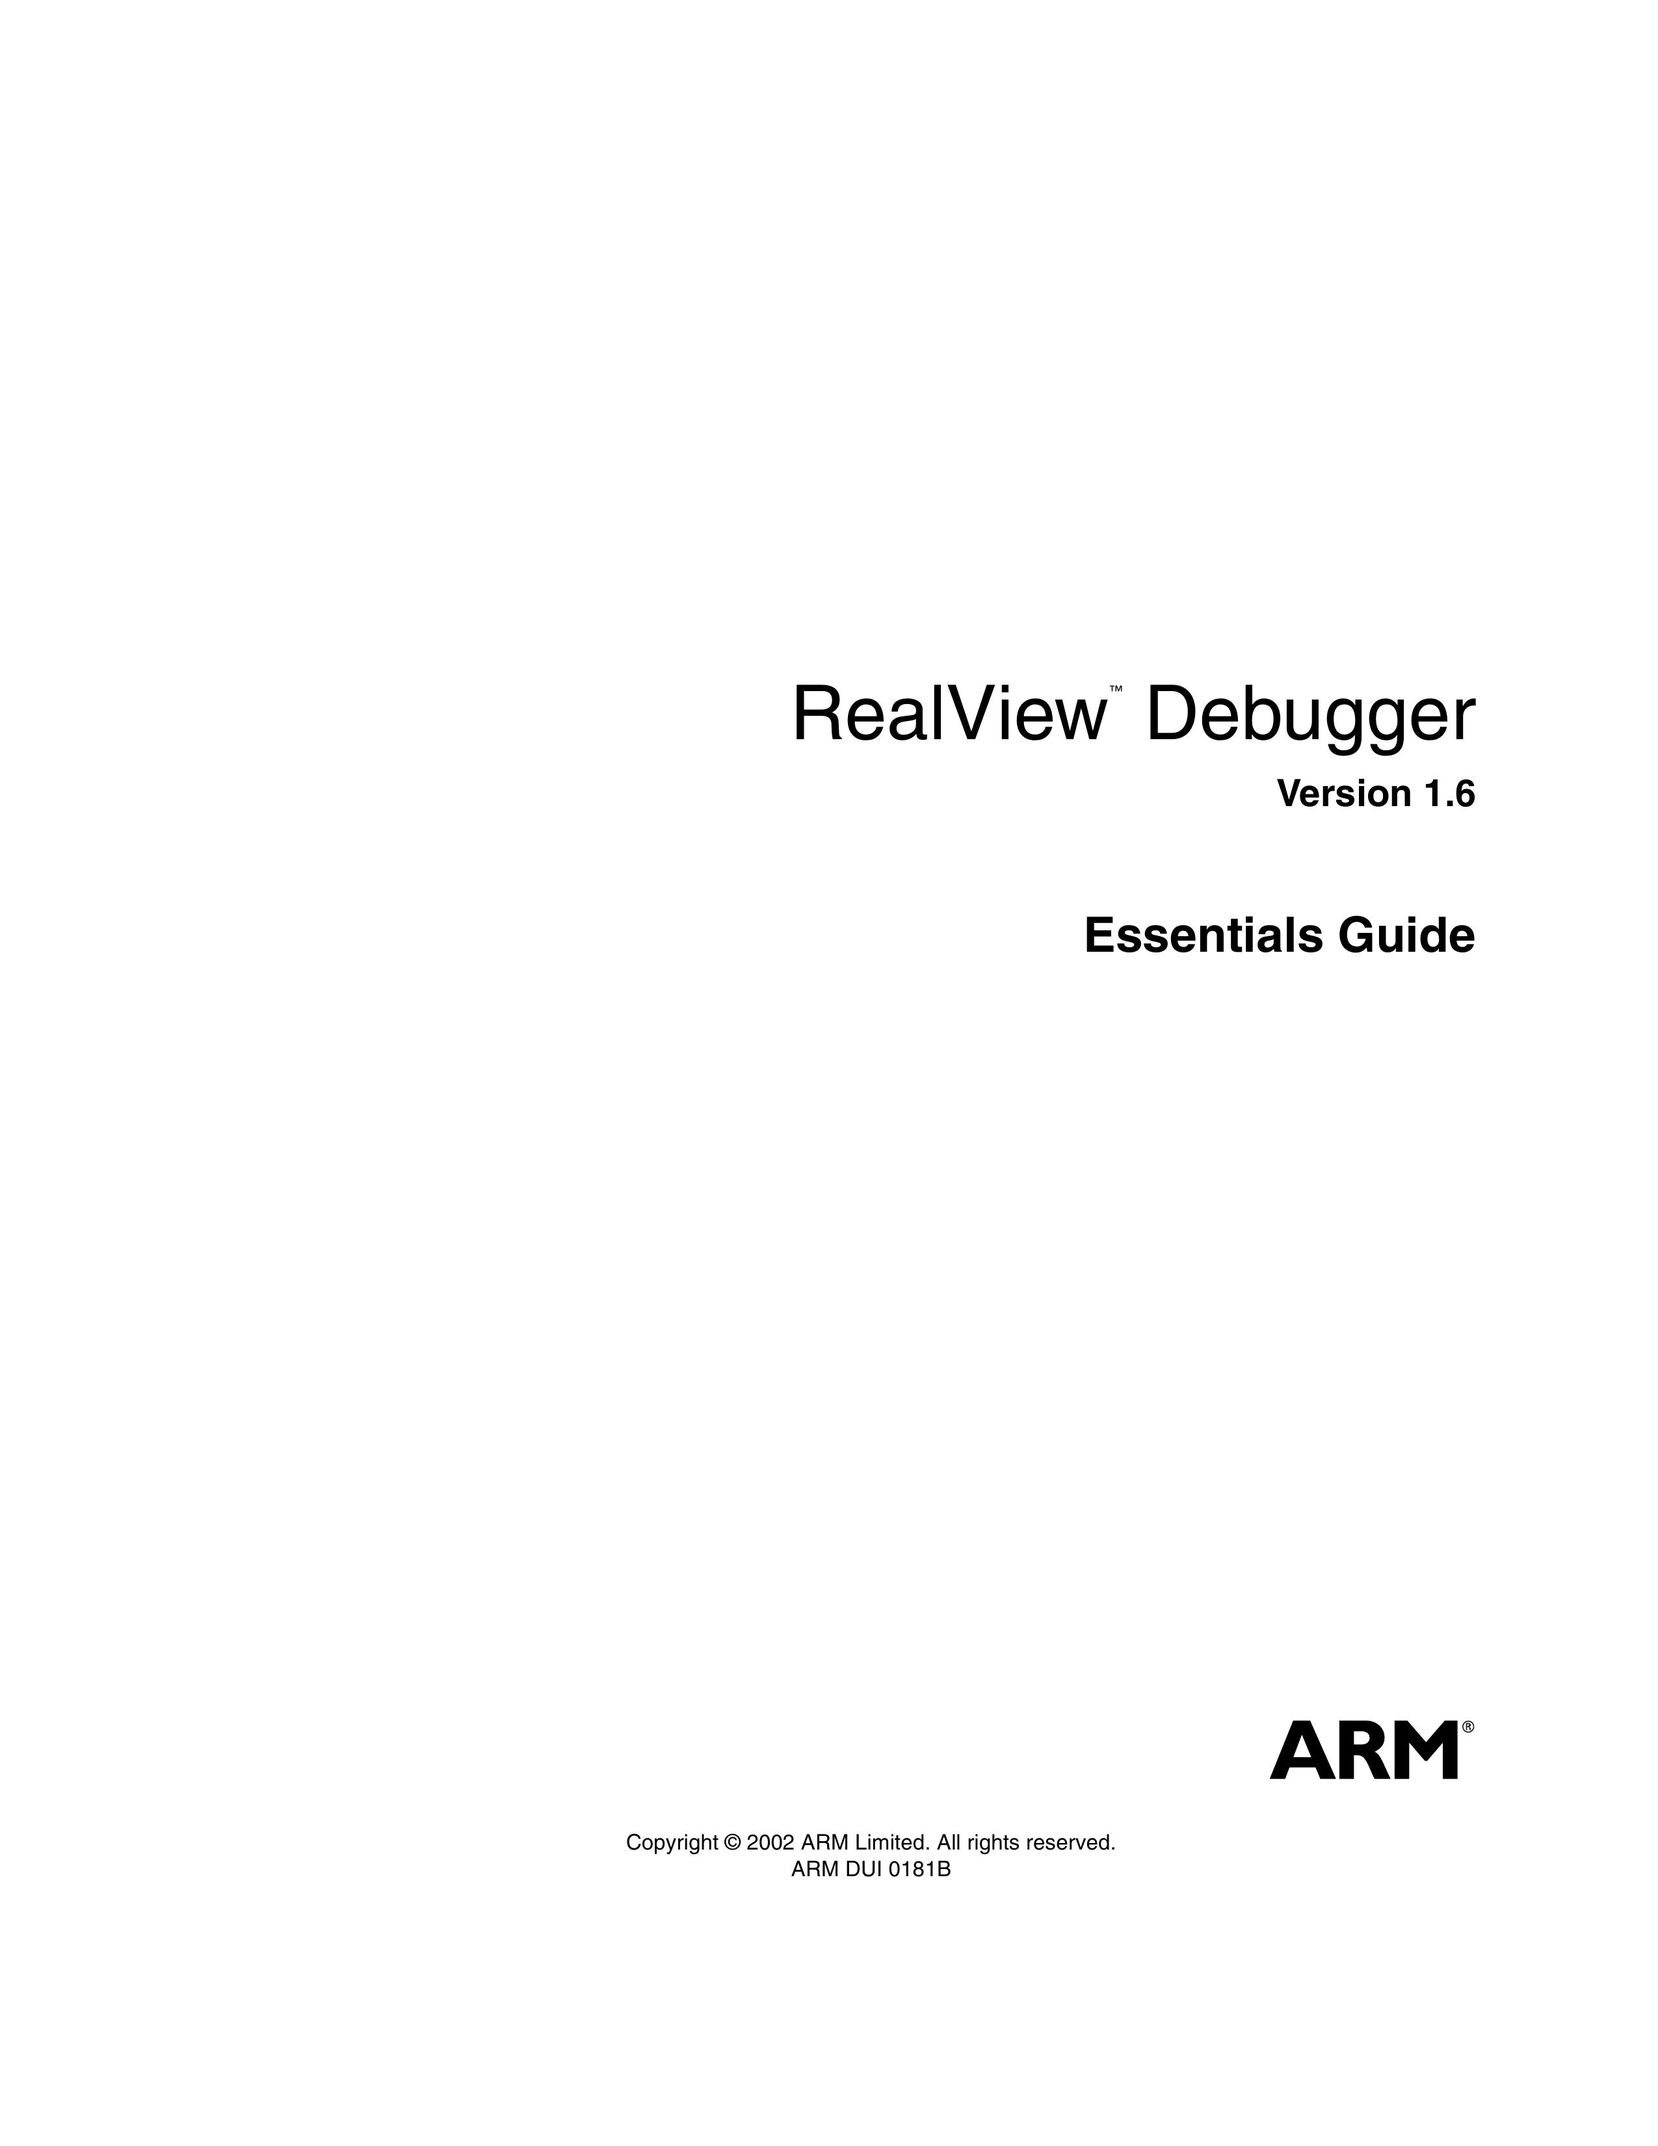 ARM Version 1.6 Computer Accessories User Manual